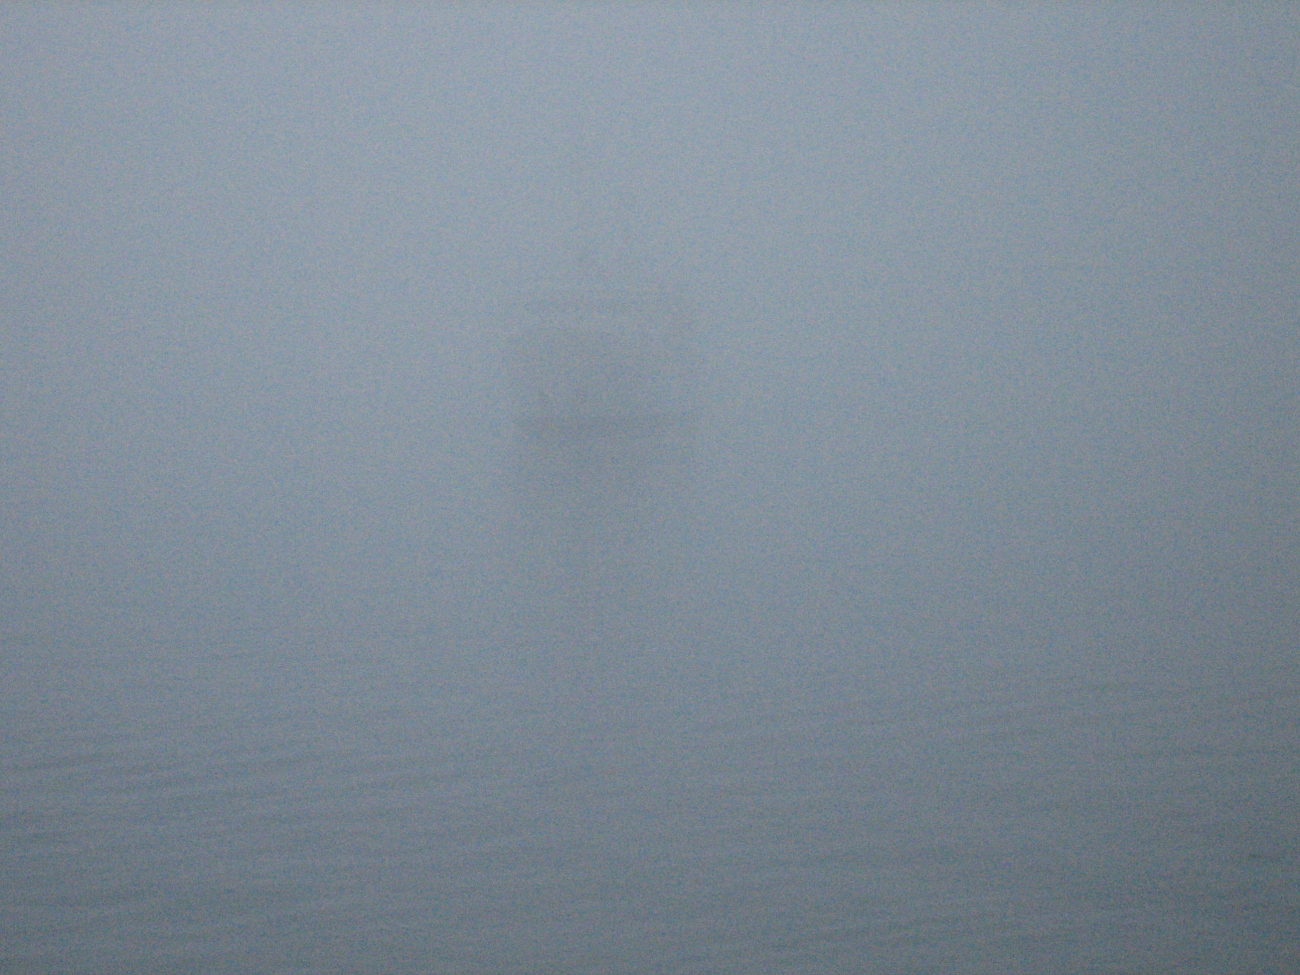 Photo #1 of NOAA Ship FAIRWEATHER approaching pier in fog at Valdez